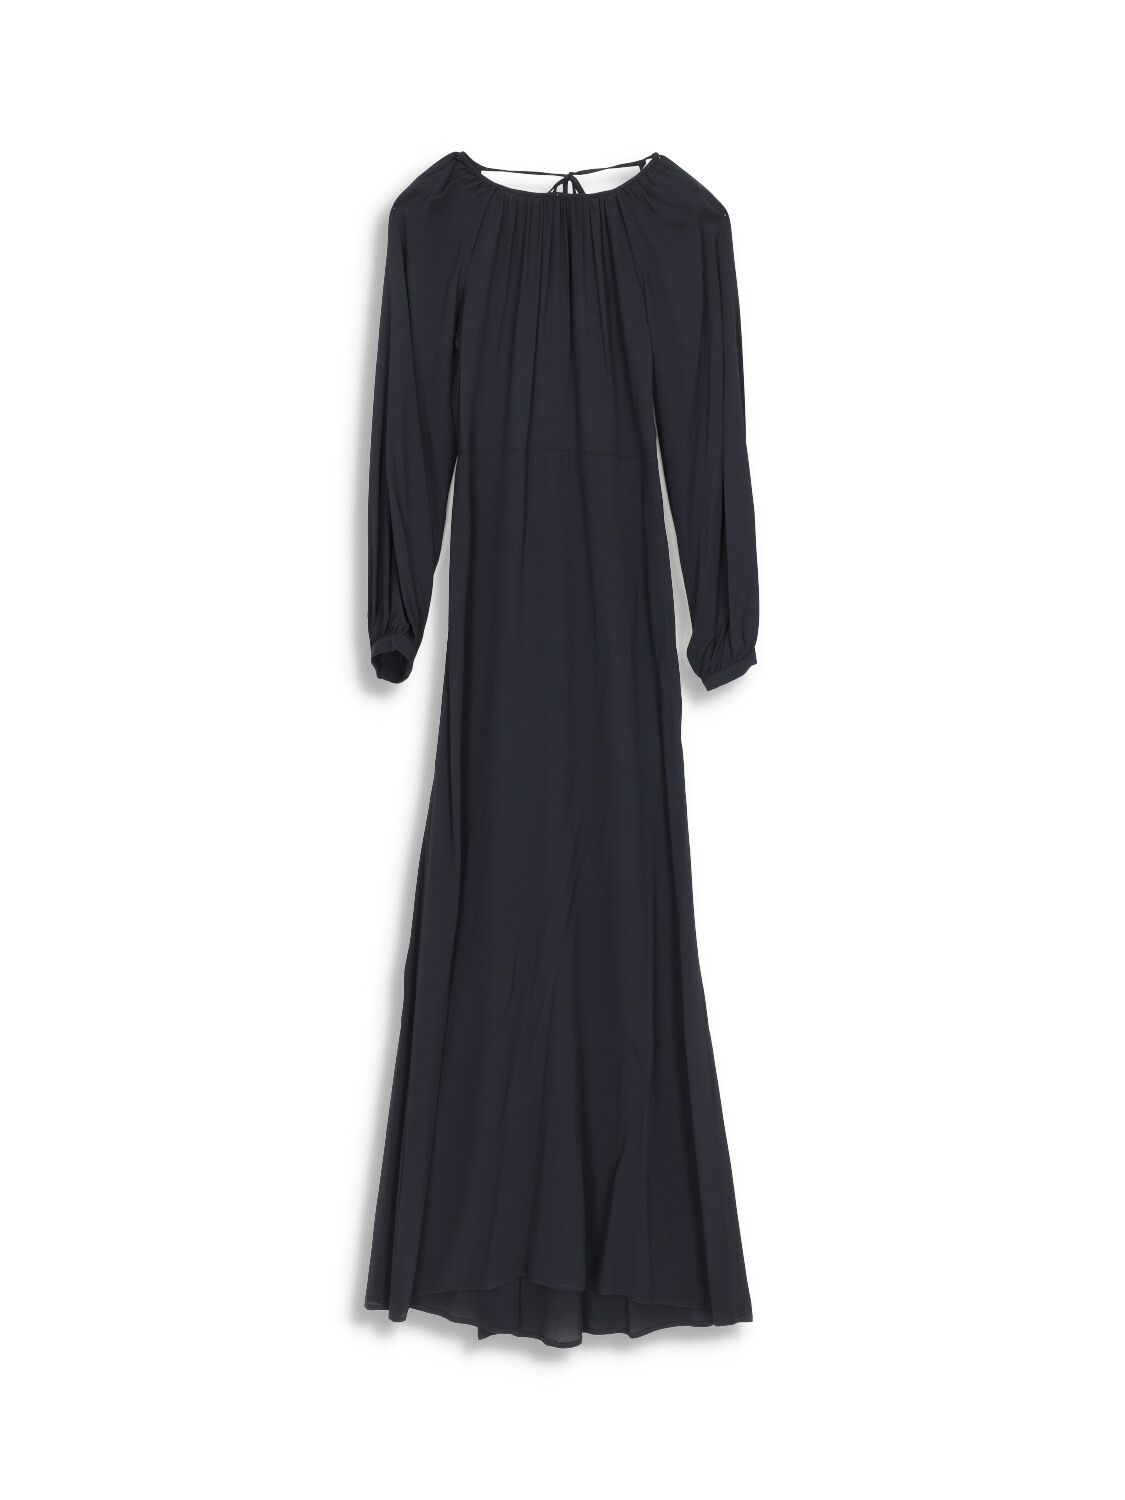 Flowing maxi dress with back neckline